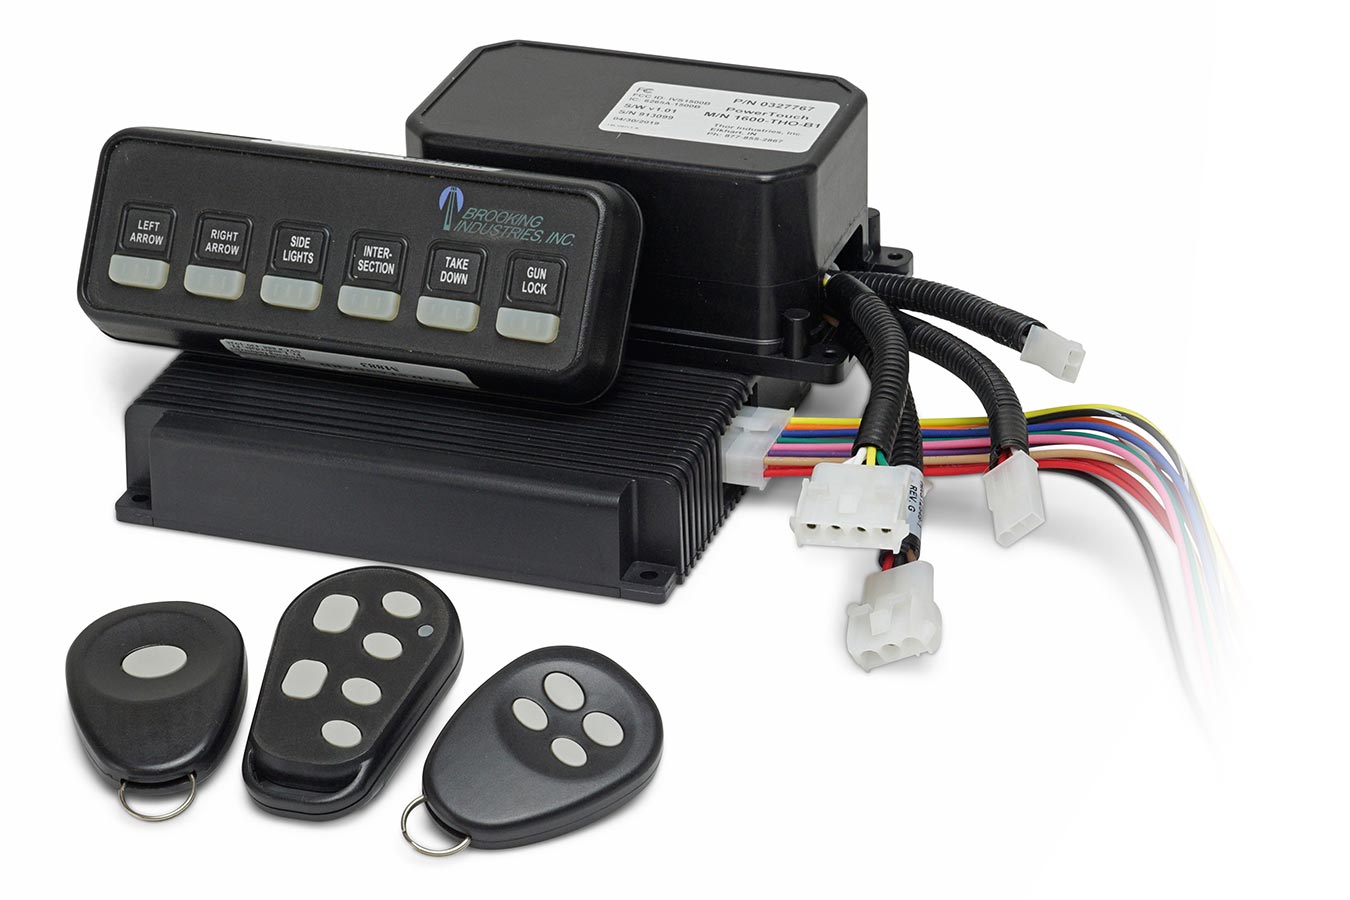 Lighting, motor and pump remote controls